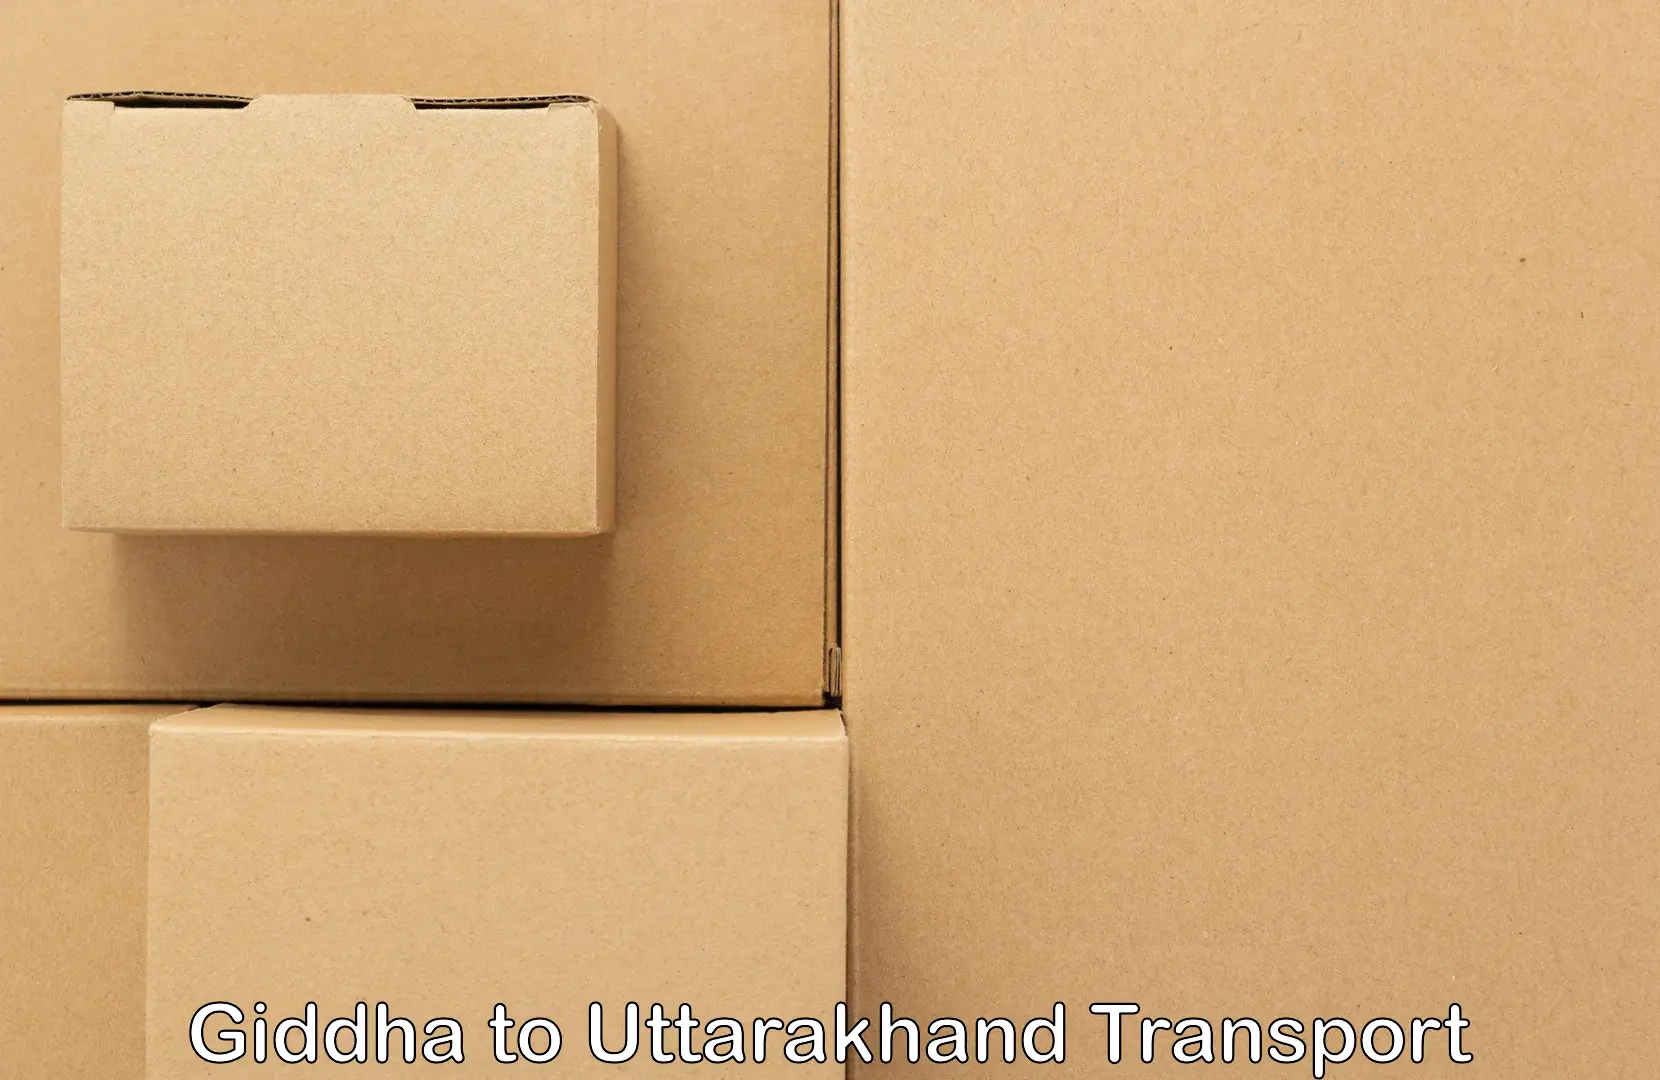 Truck transport companies in India Giddha to Mussoorie